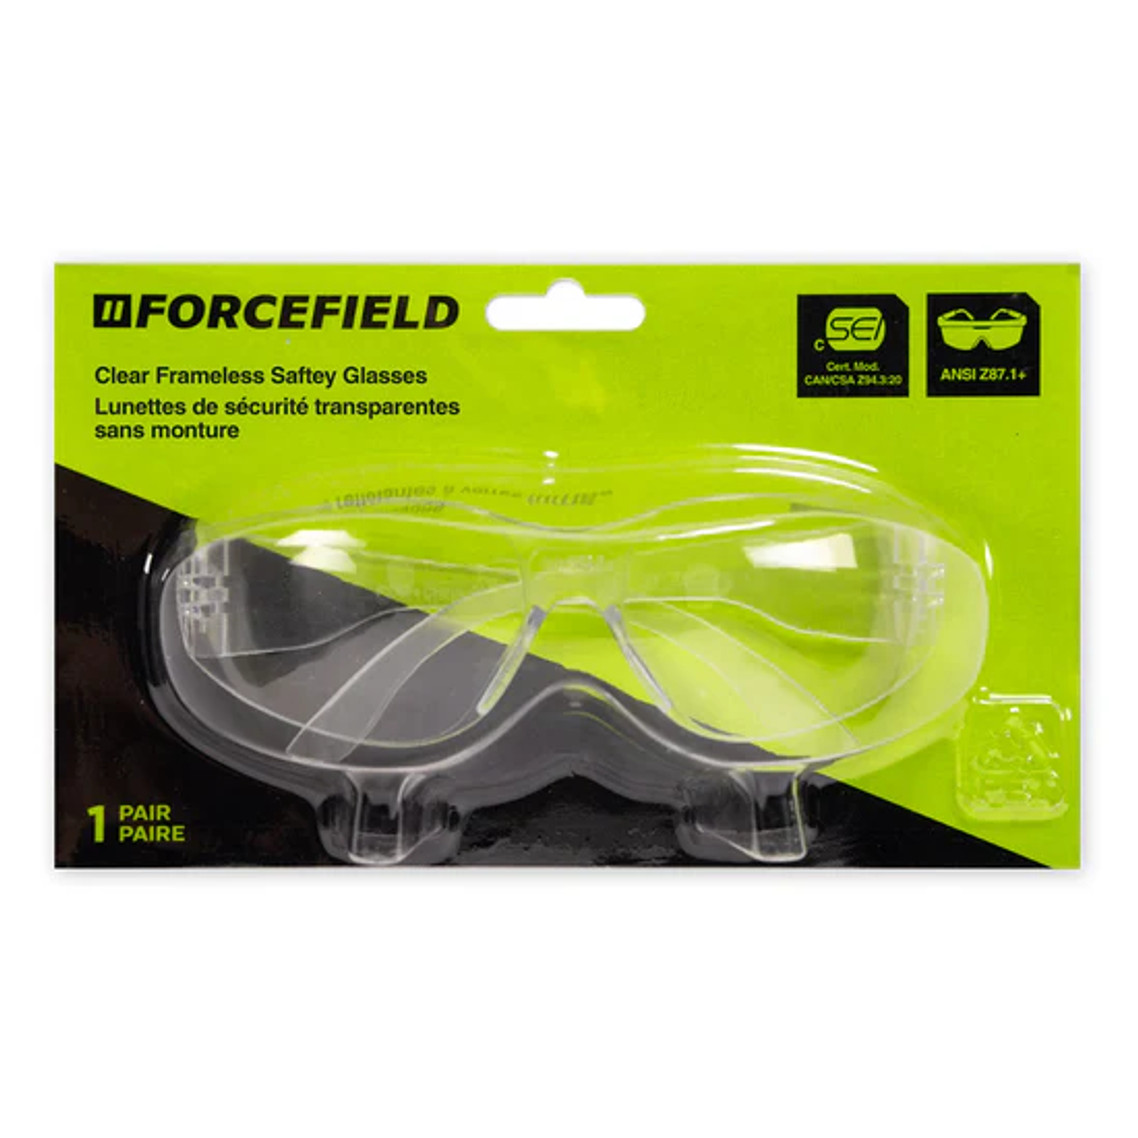 ForceField Classic Clear Frameless Safety Glasses (12 Pairs/Box) | SafetyApparel.ca